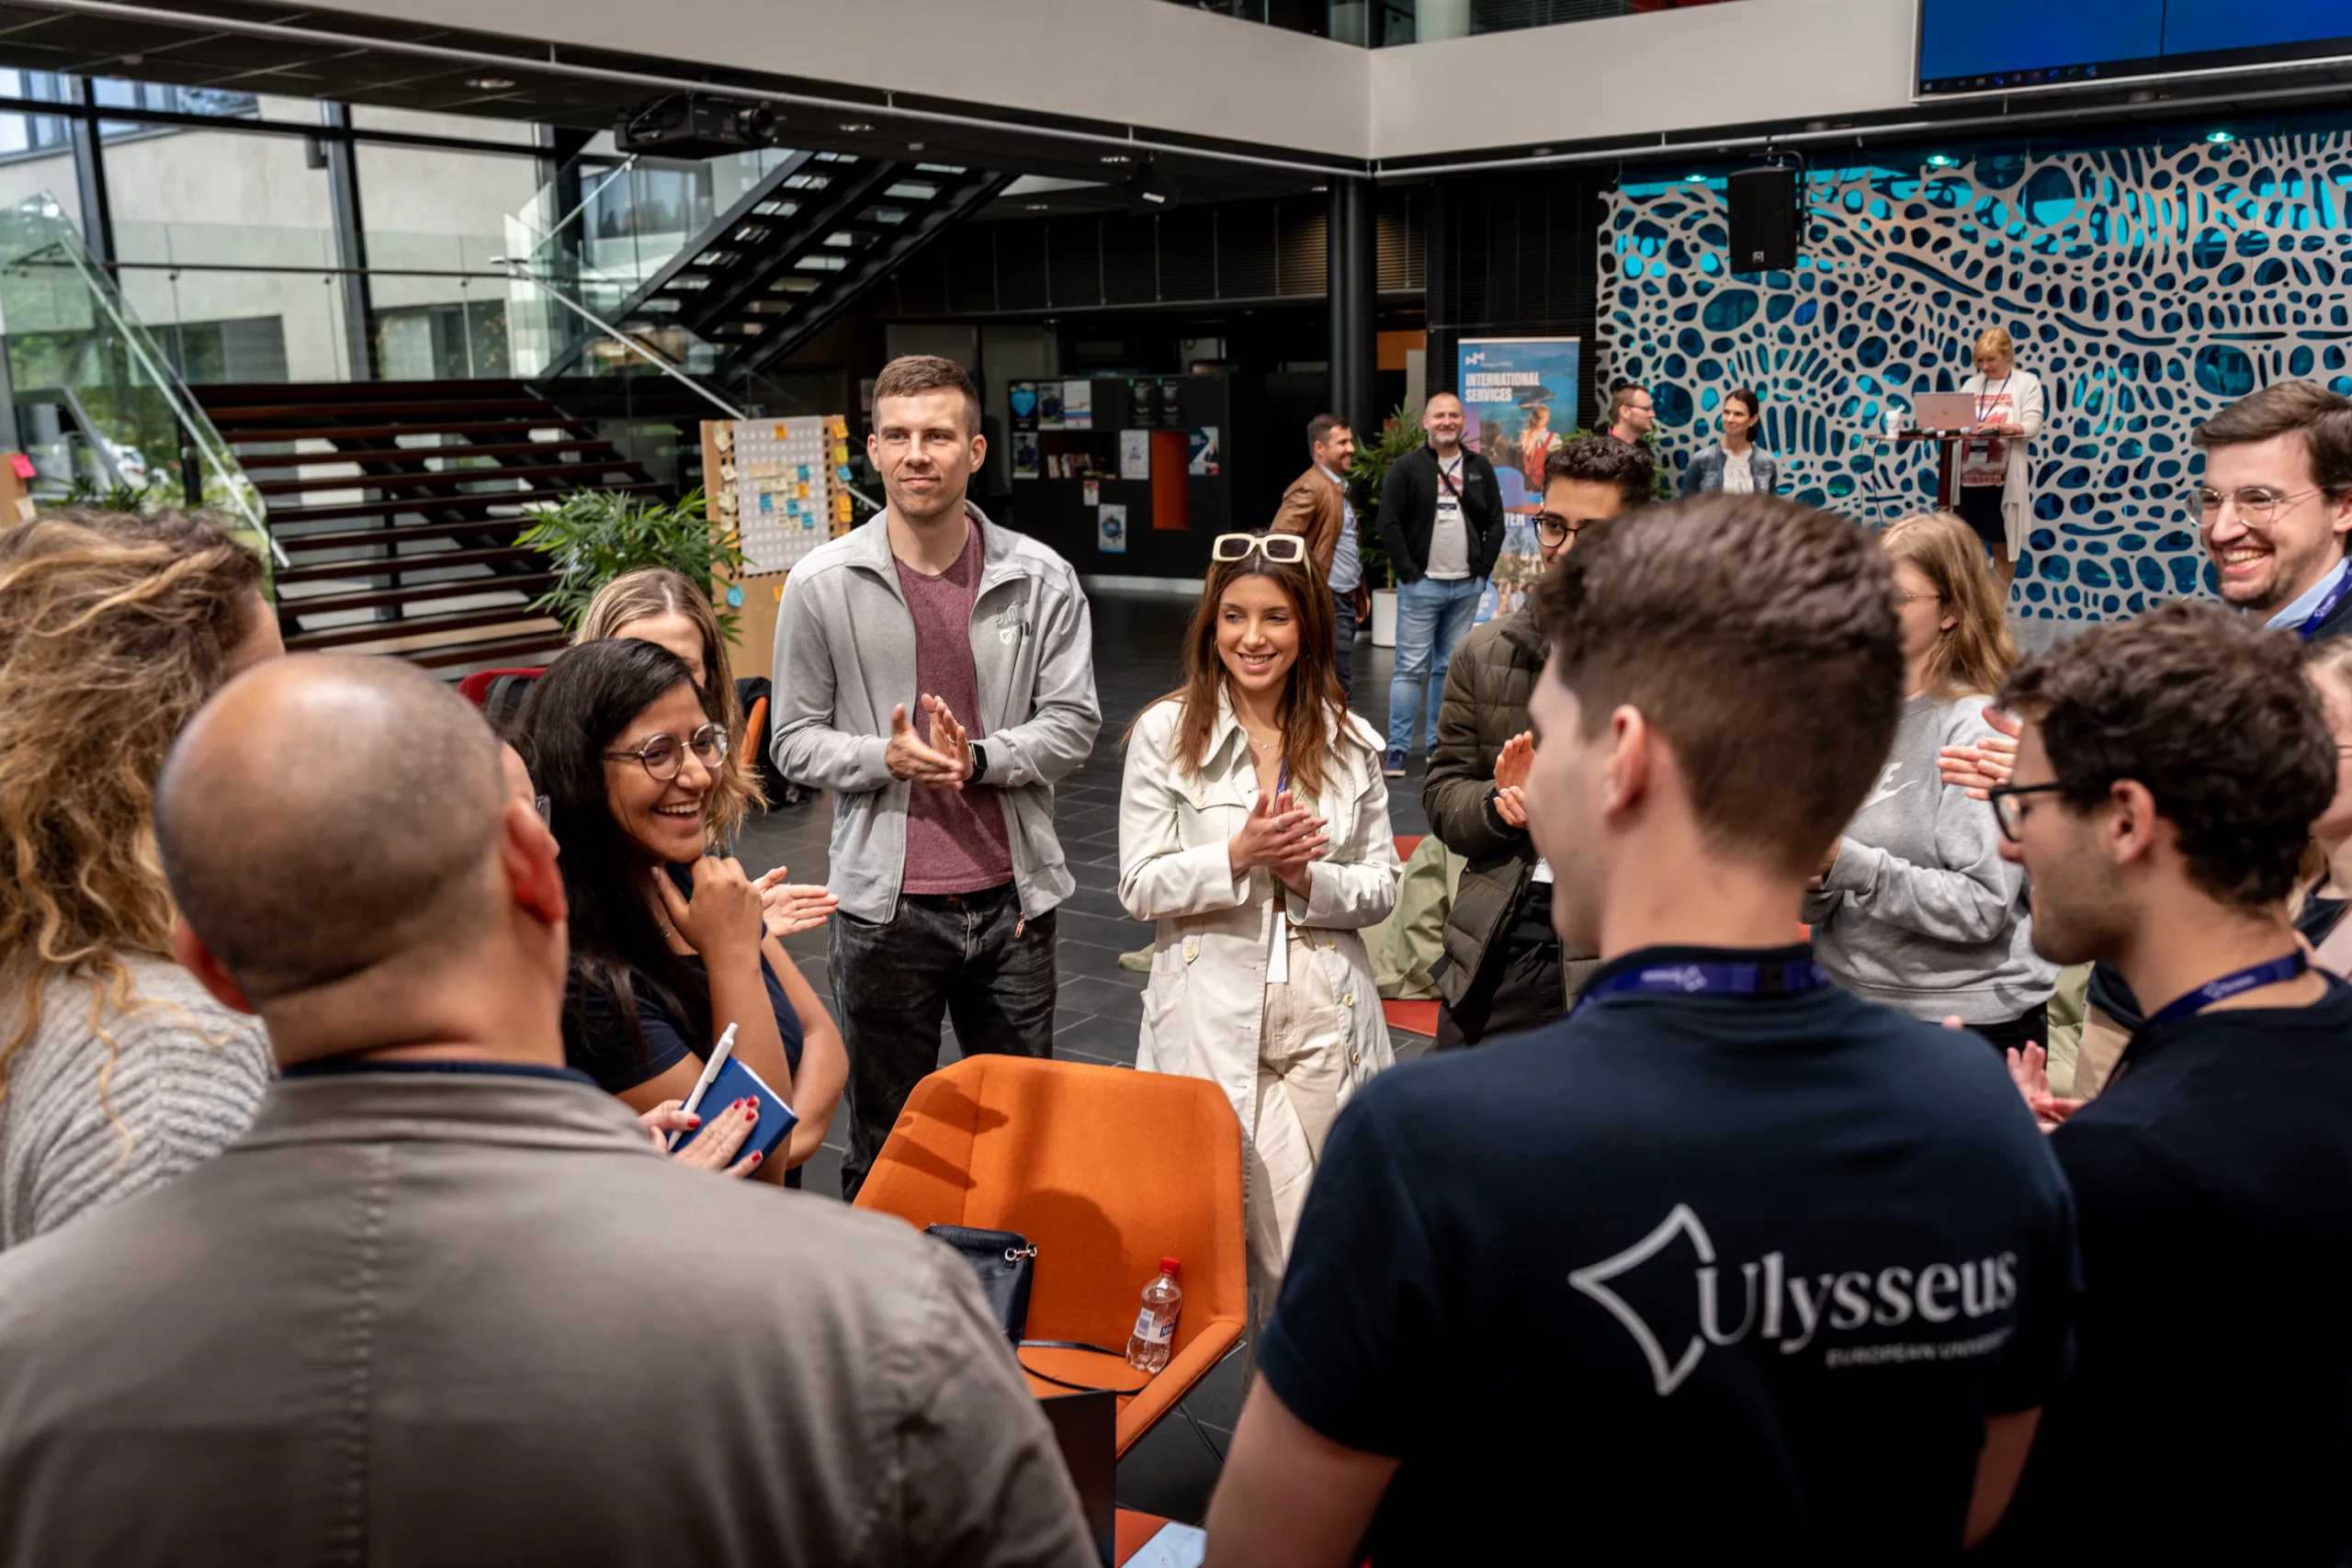 Meet Ulysseus, the European University for the citizens of the Future